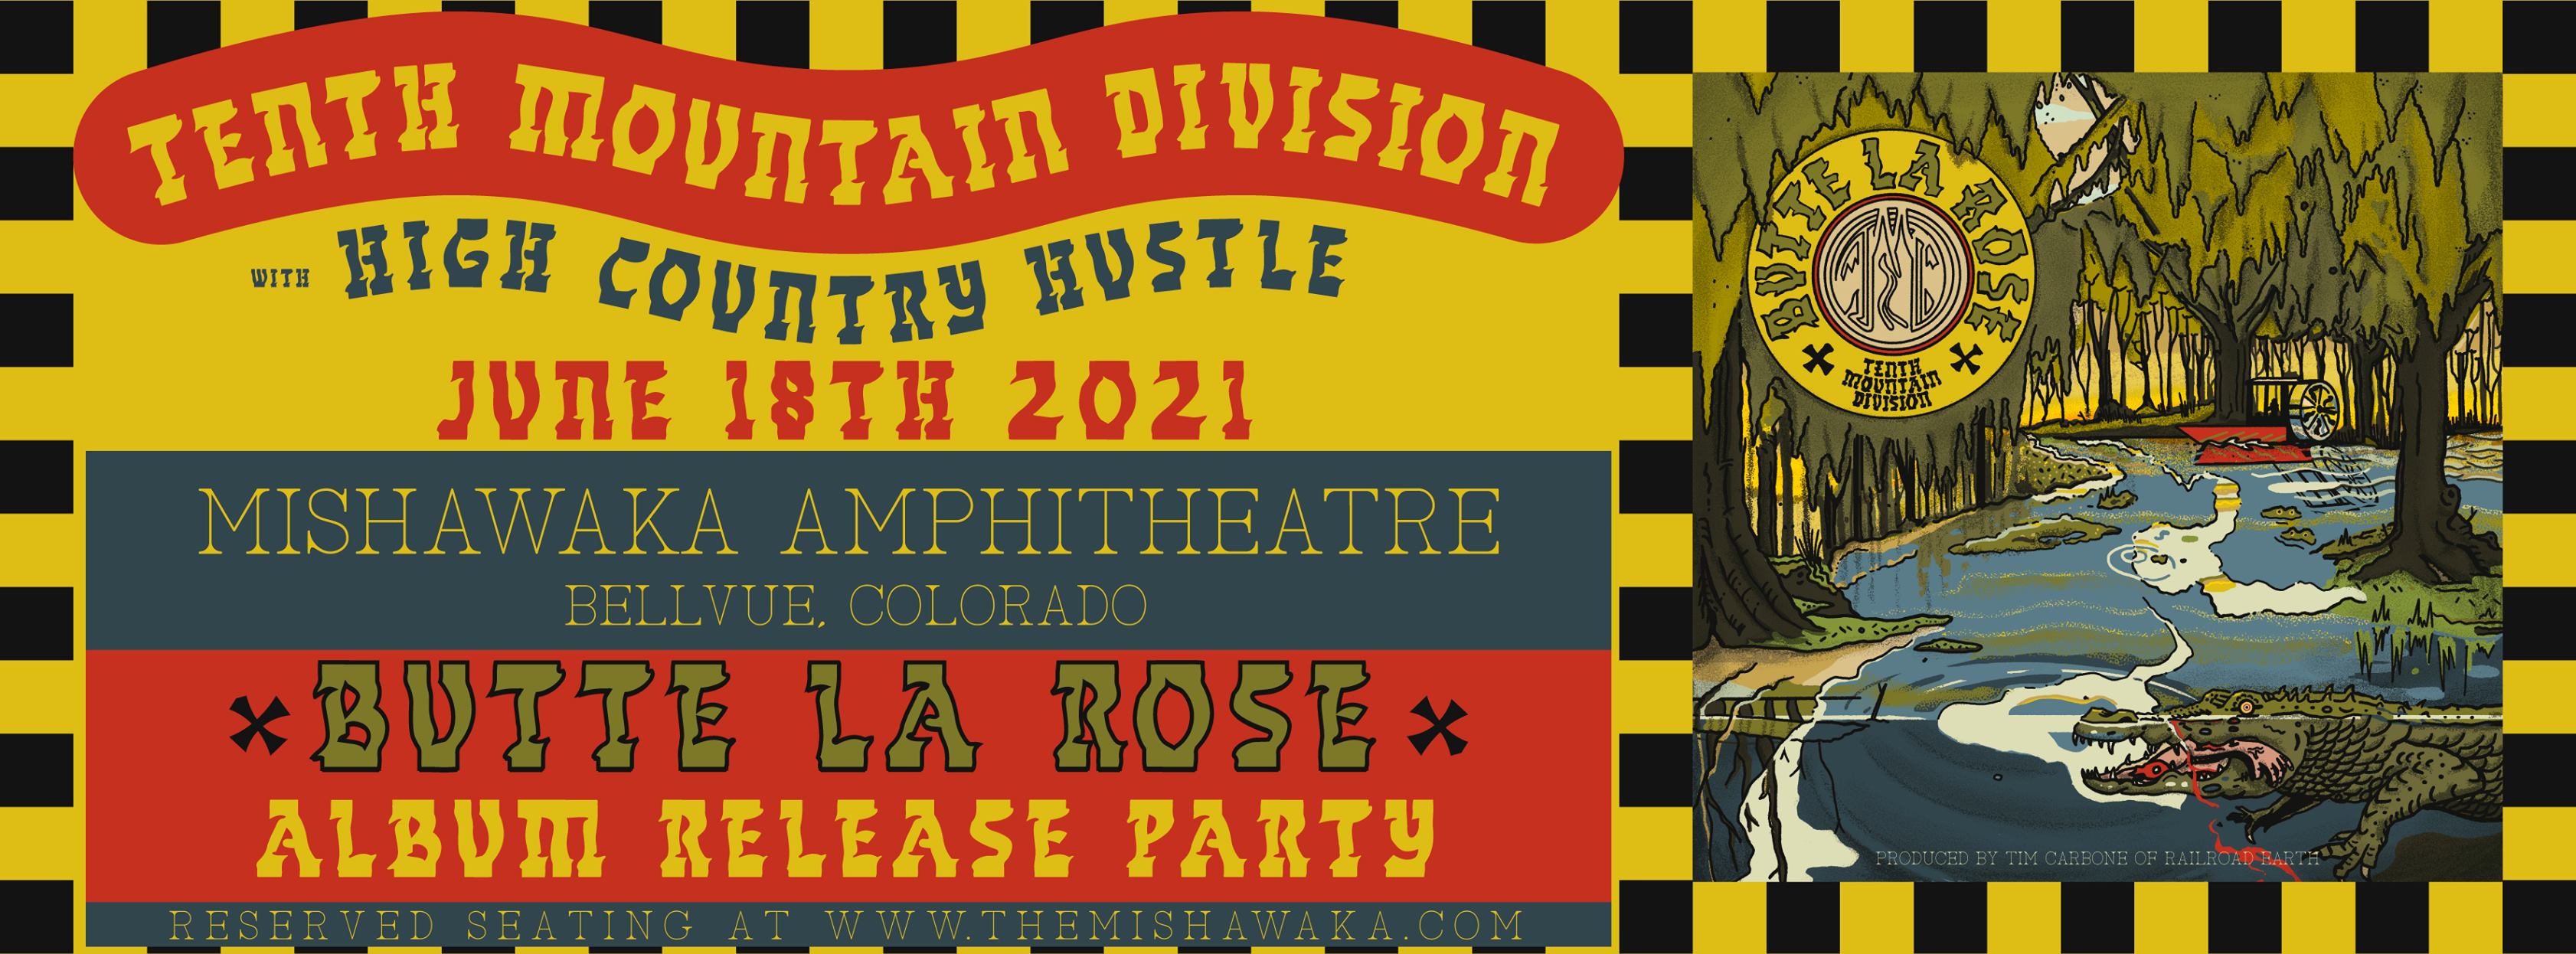 Tenth Mountain Division Independently Releases Butte La Rose’